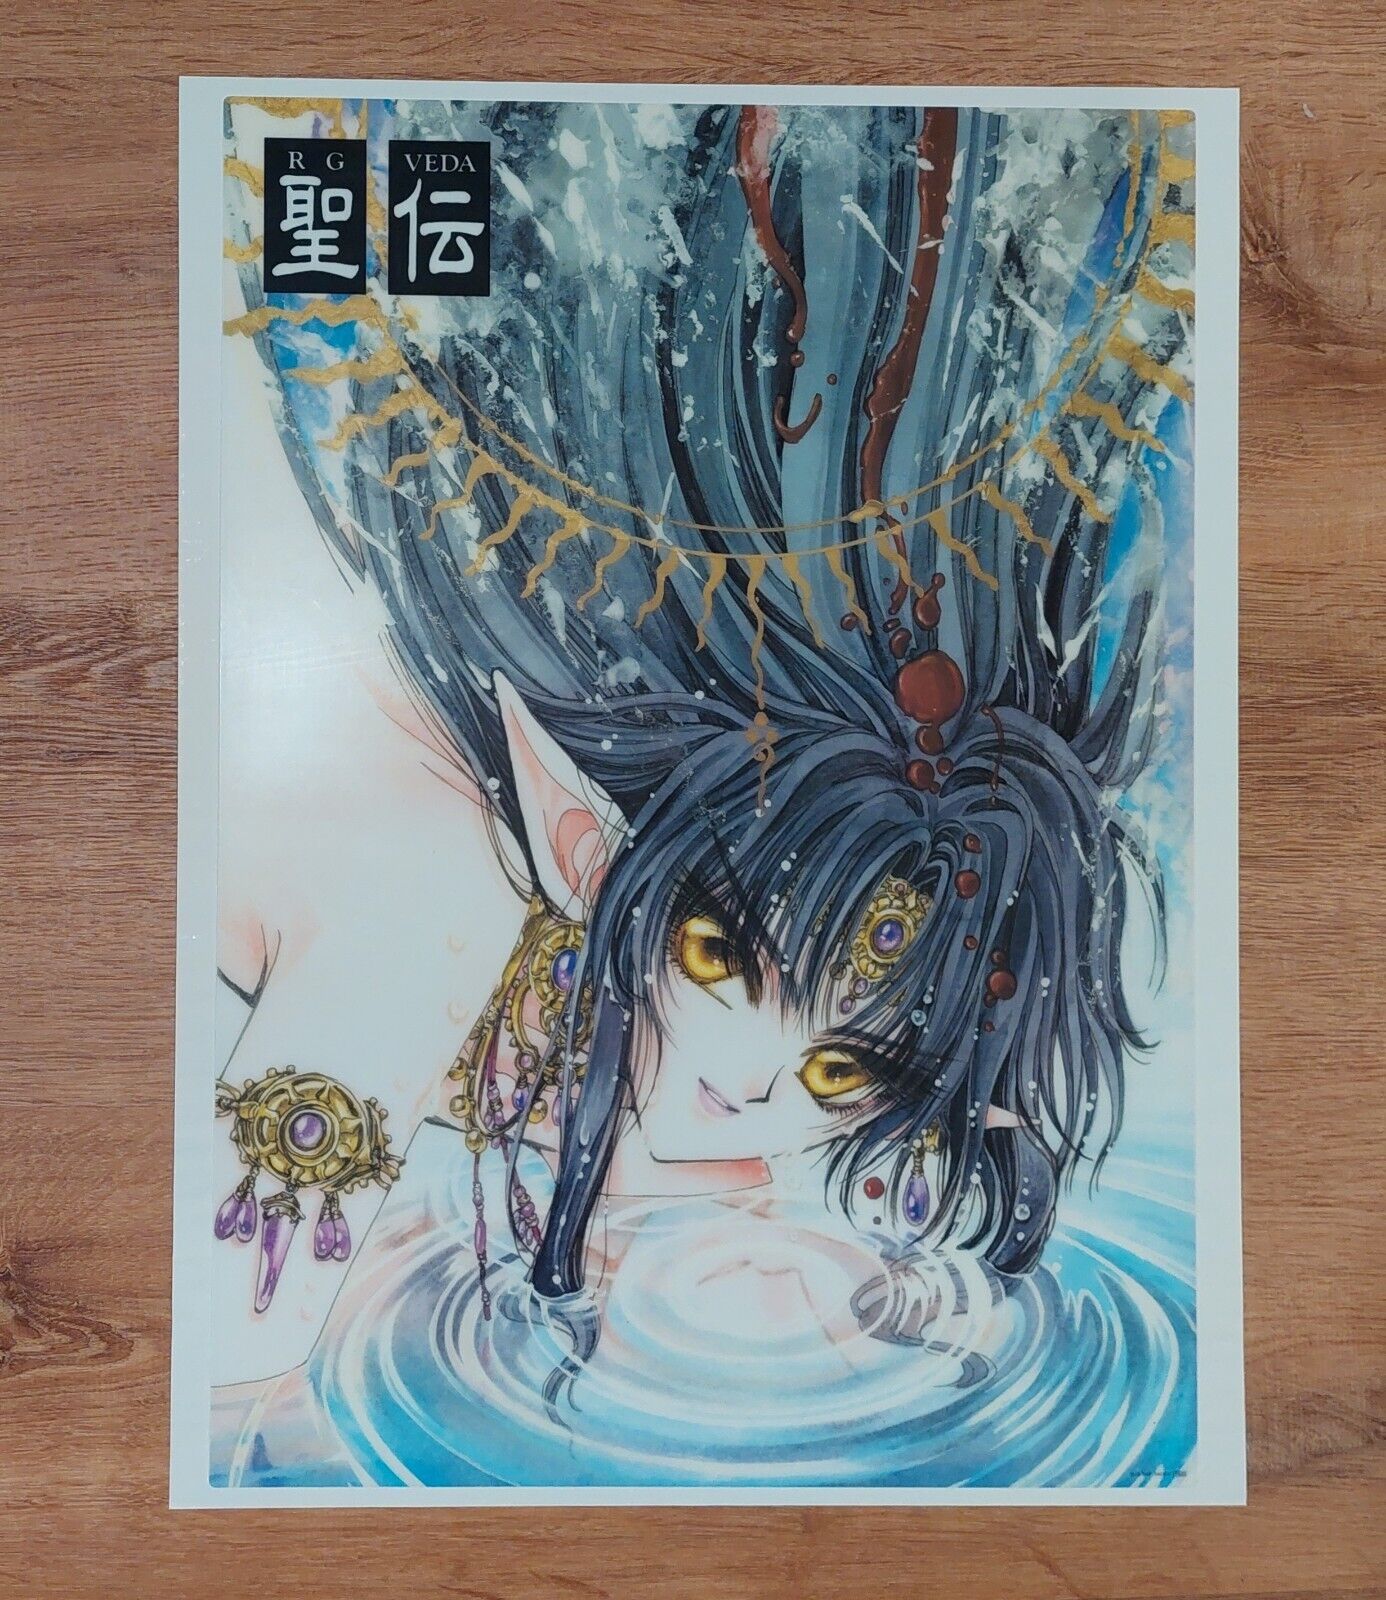 RG Veda Ashura Clamp Large Clear Transparent Poster VERY RARE w/ Poster Frame